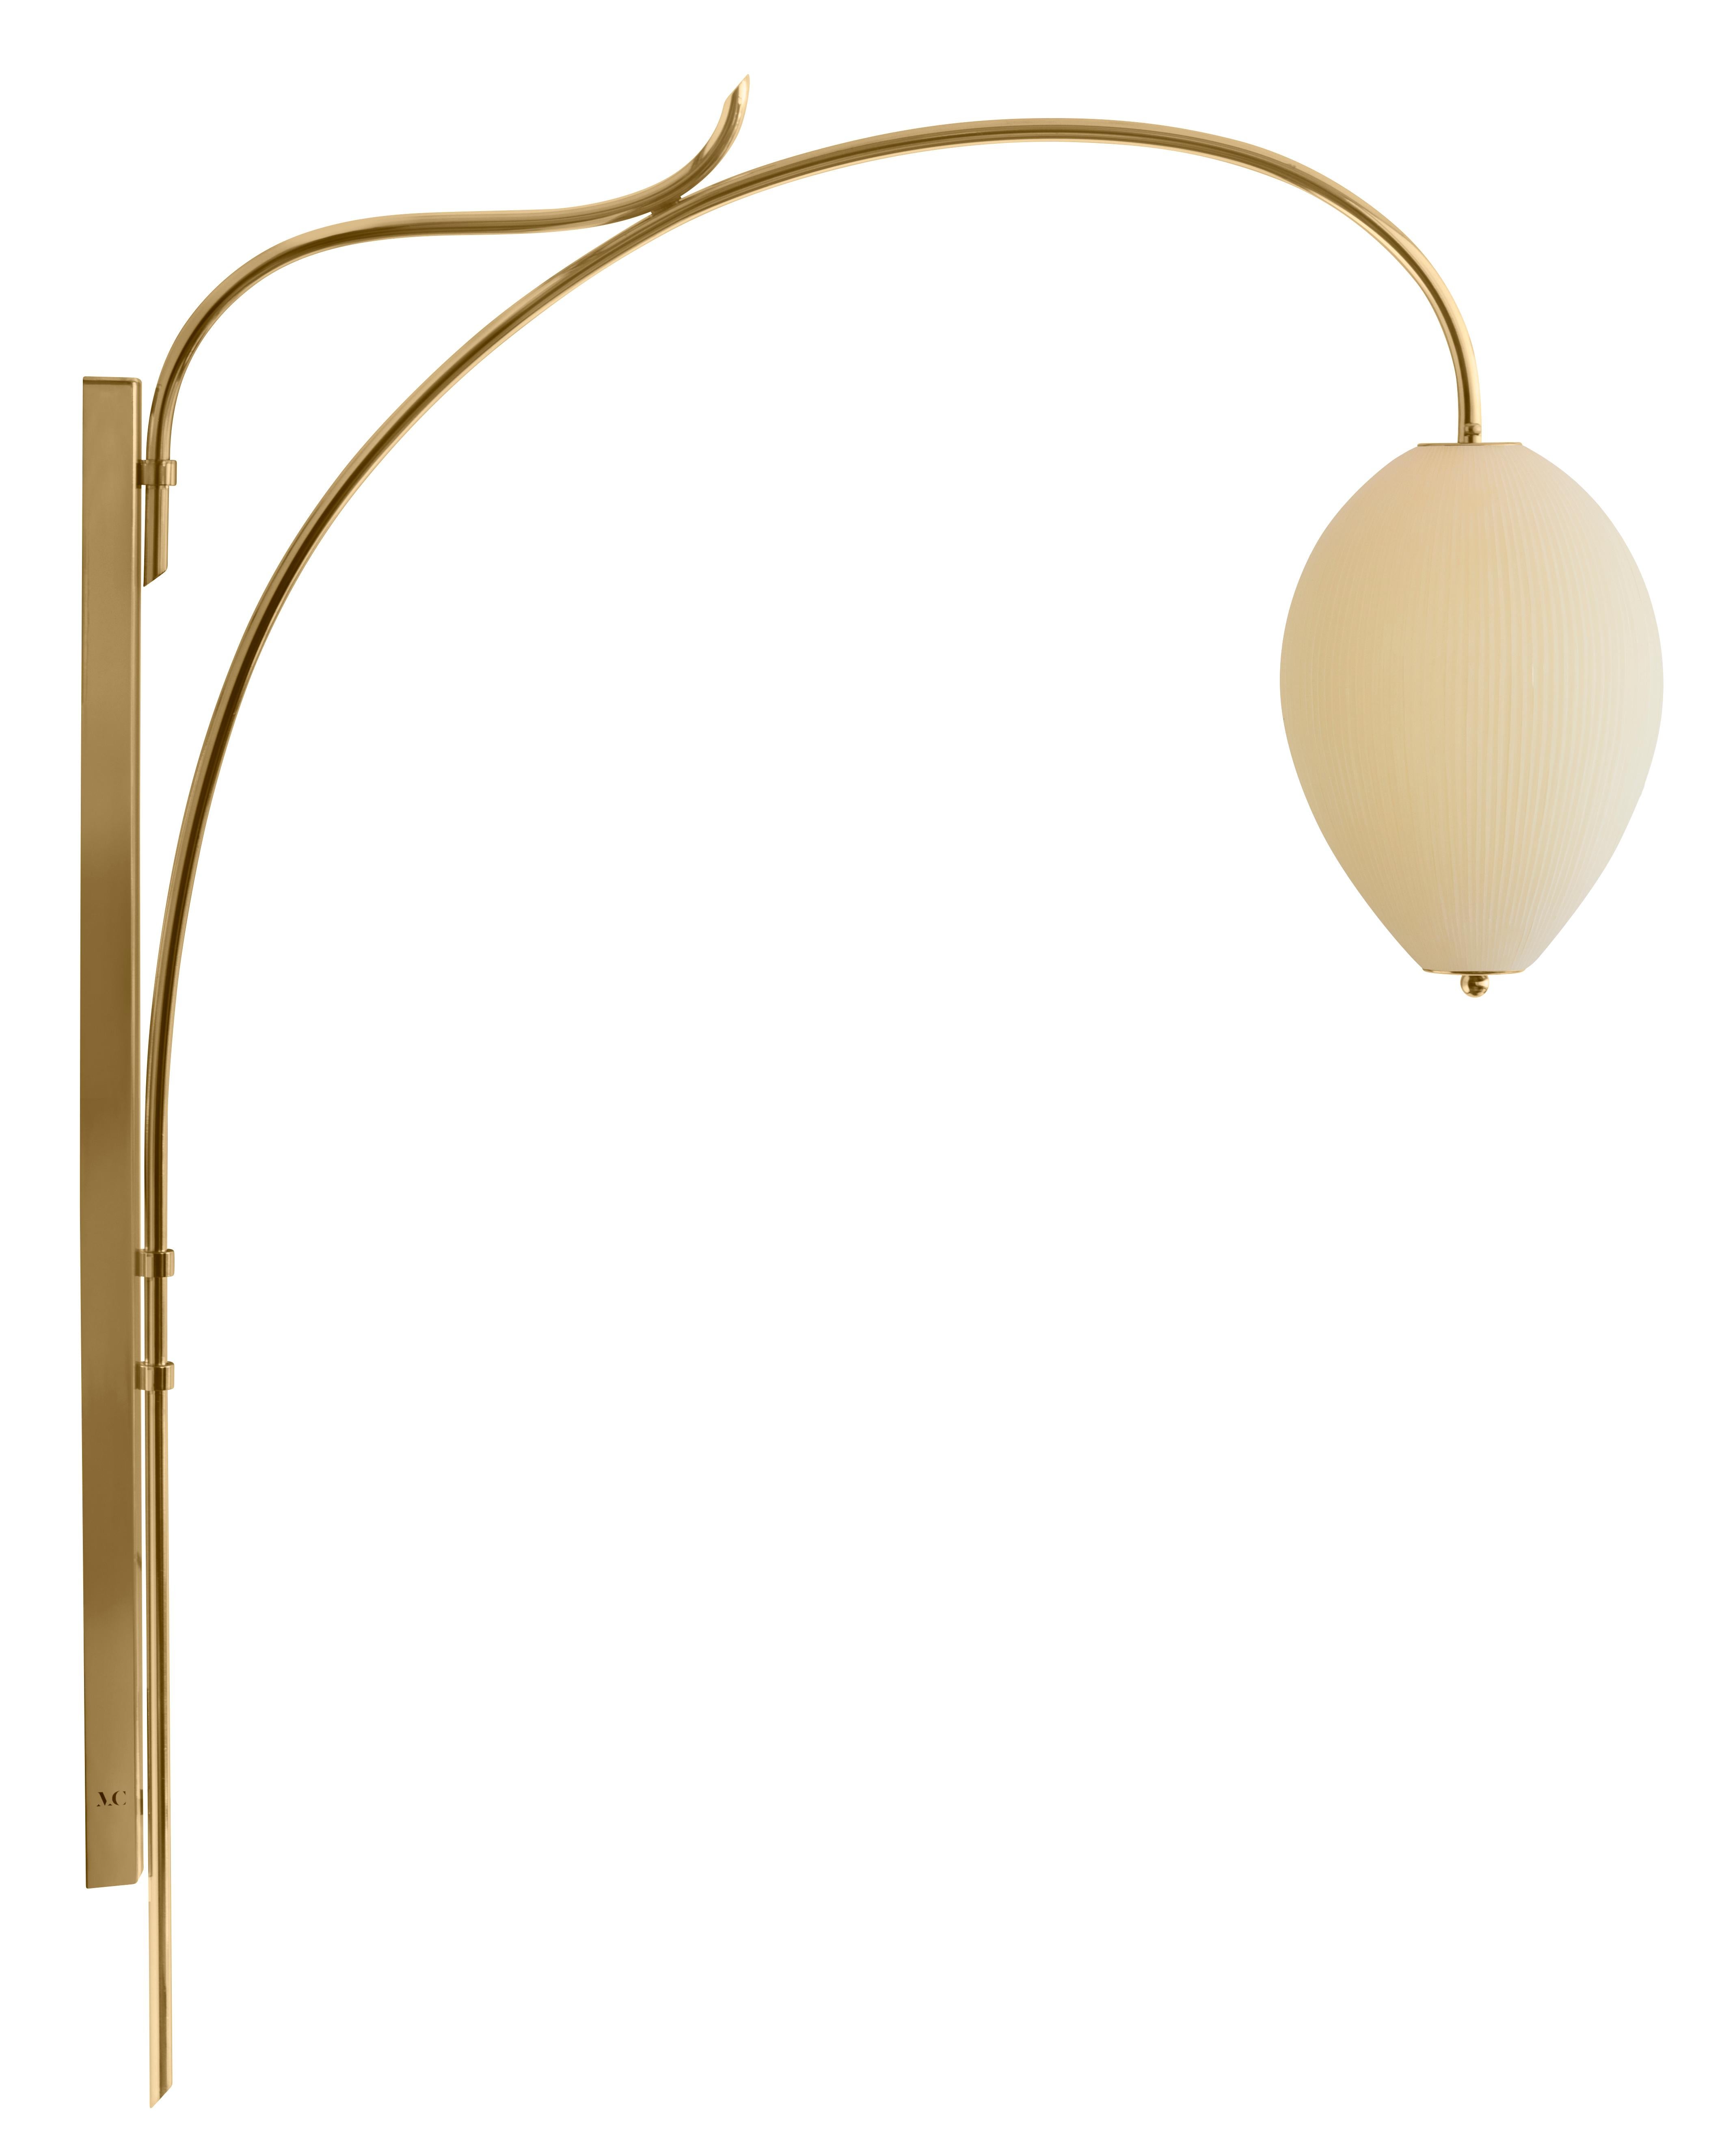 Wall Lamp China 10 by Magic Circus Editions
Dimensions: H 134 x W 25.2 x D 113.5 cm
Materials: Brass, mouth blown glass sculpted with a diamond saw
Colour: mustard

Available finishes: Brass, nickel
Available colours: enamel soft white, soft